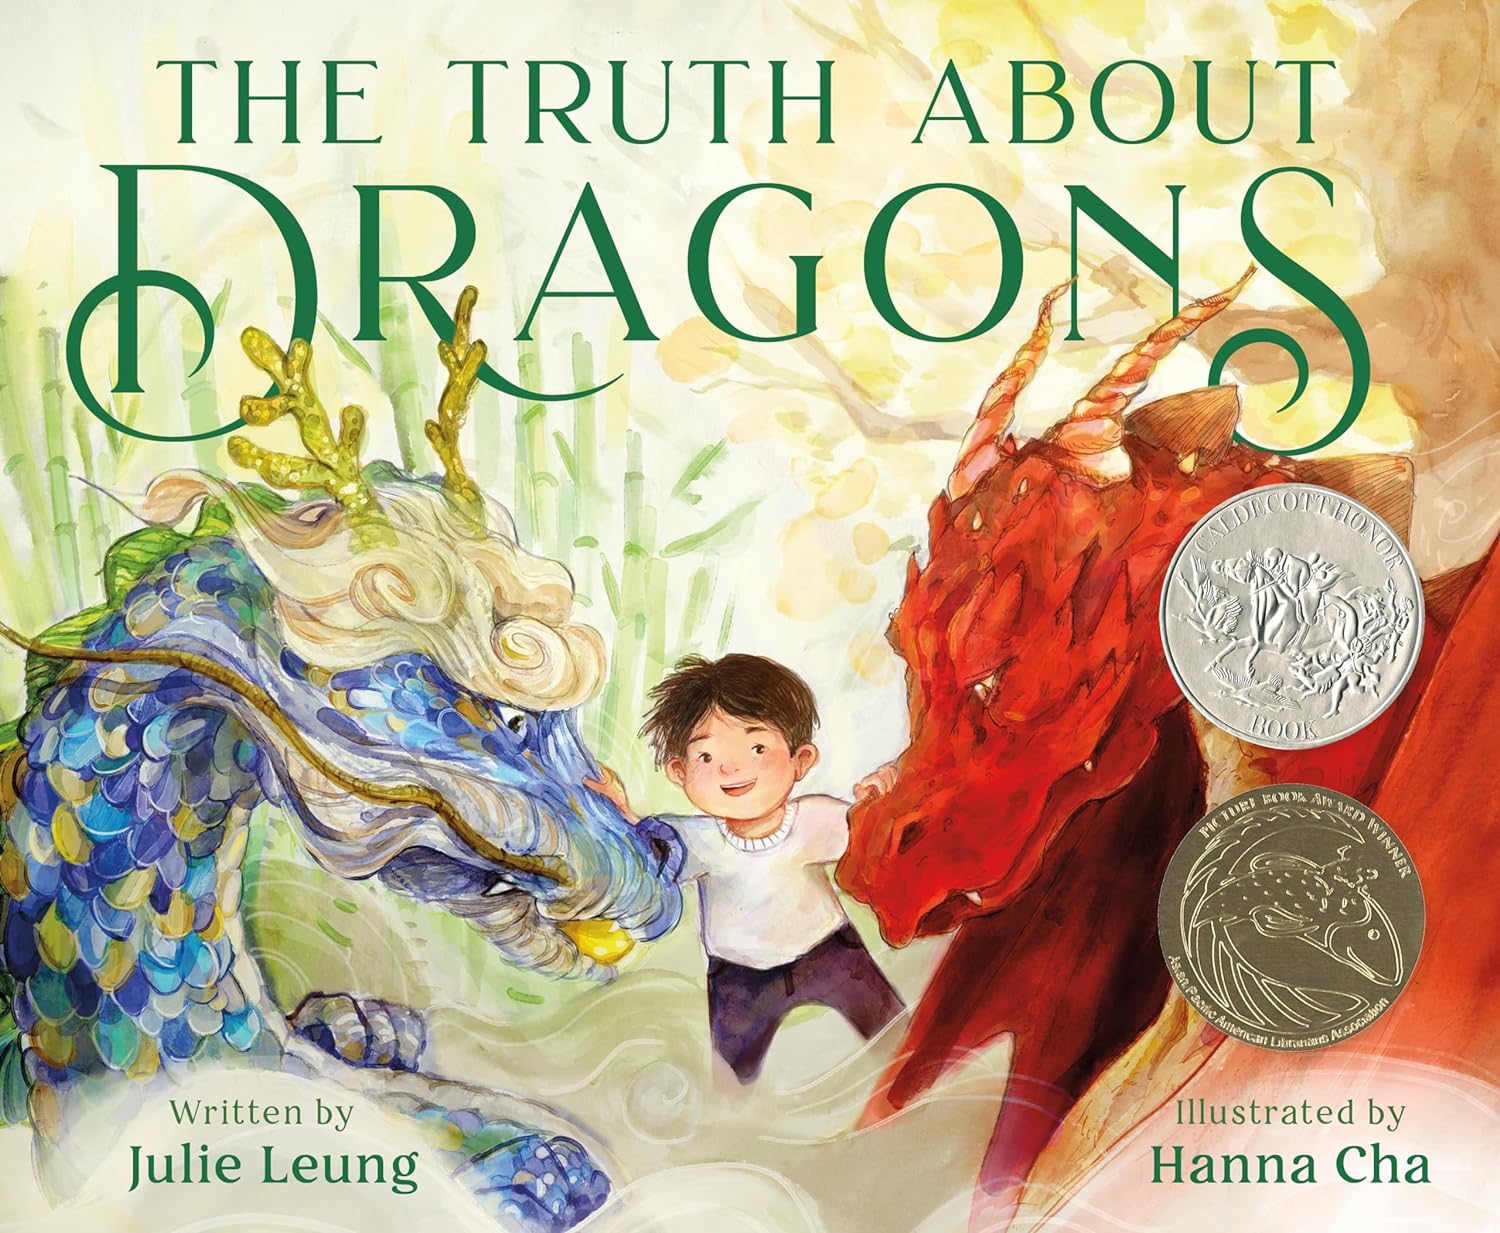 Image for "The Truth About Dragons"